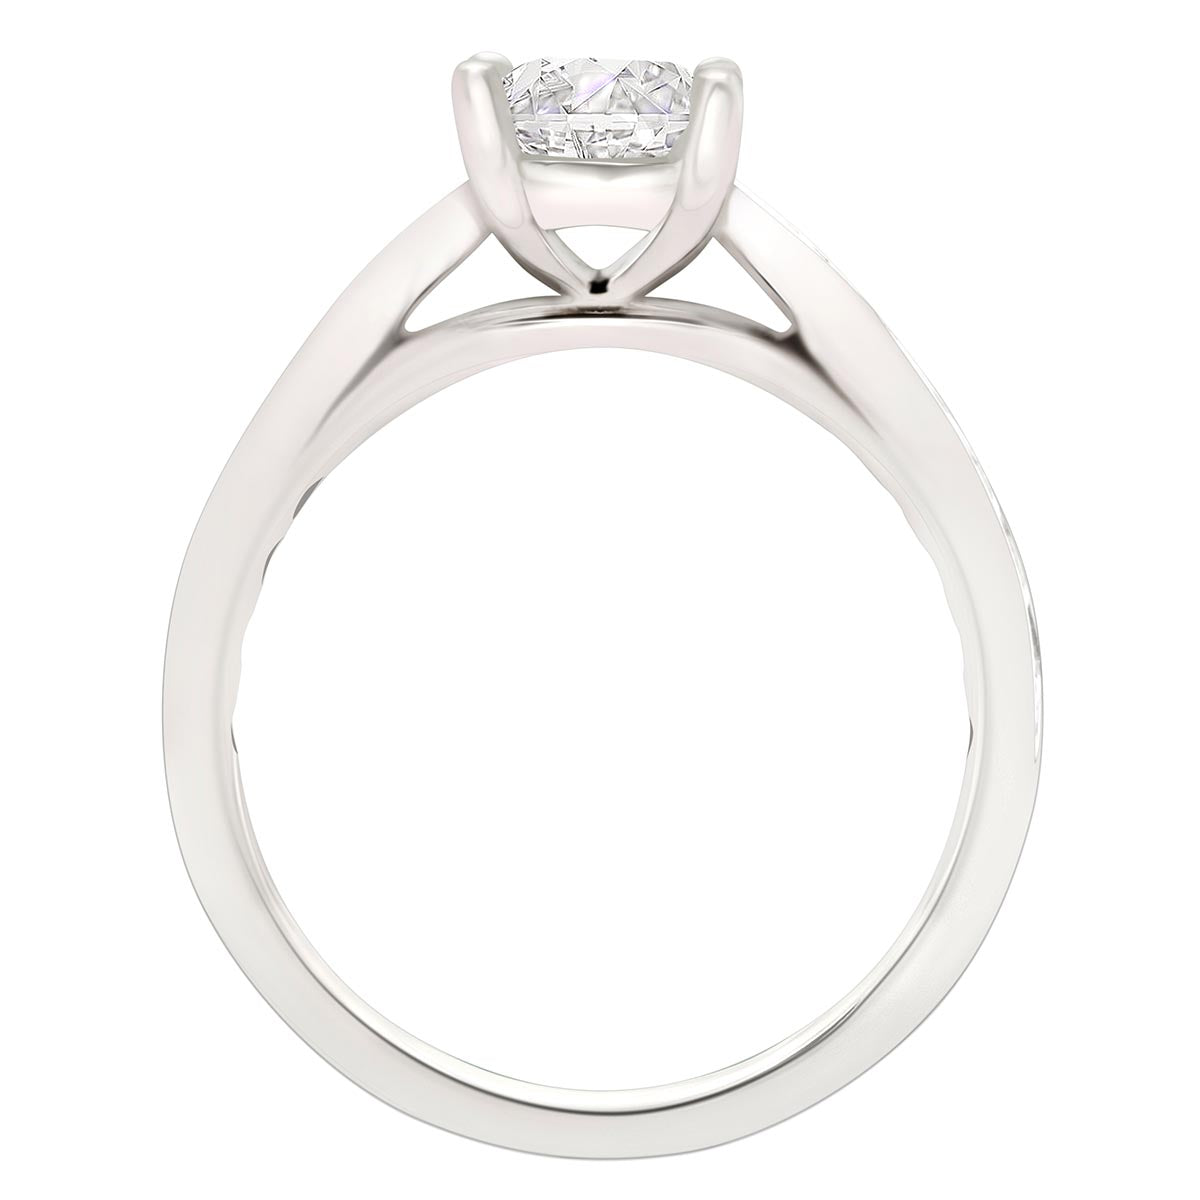 Princess Cut Diamond Solitaire with tapered diamond band in white gold standing upright